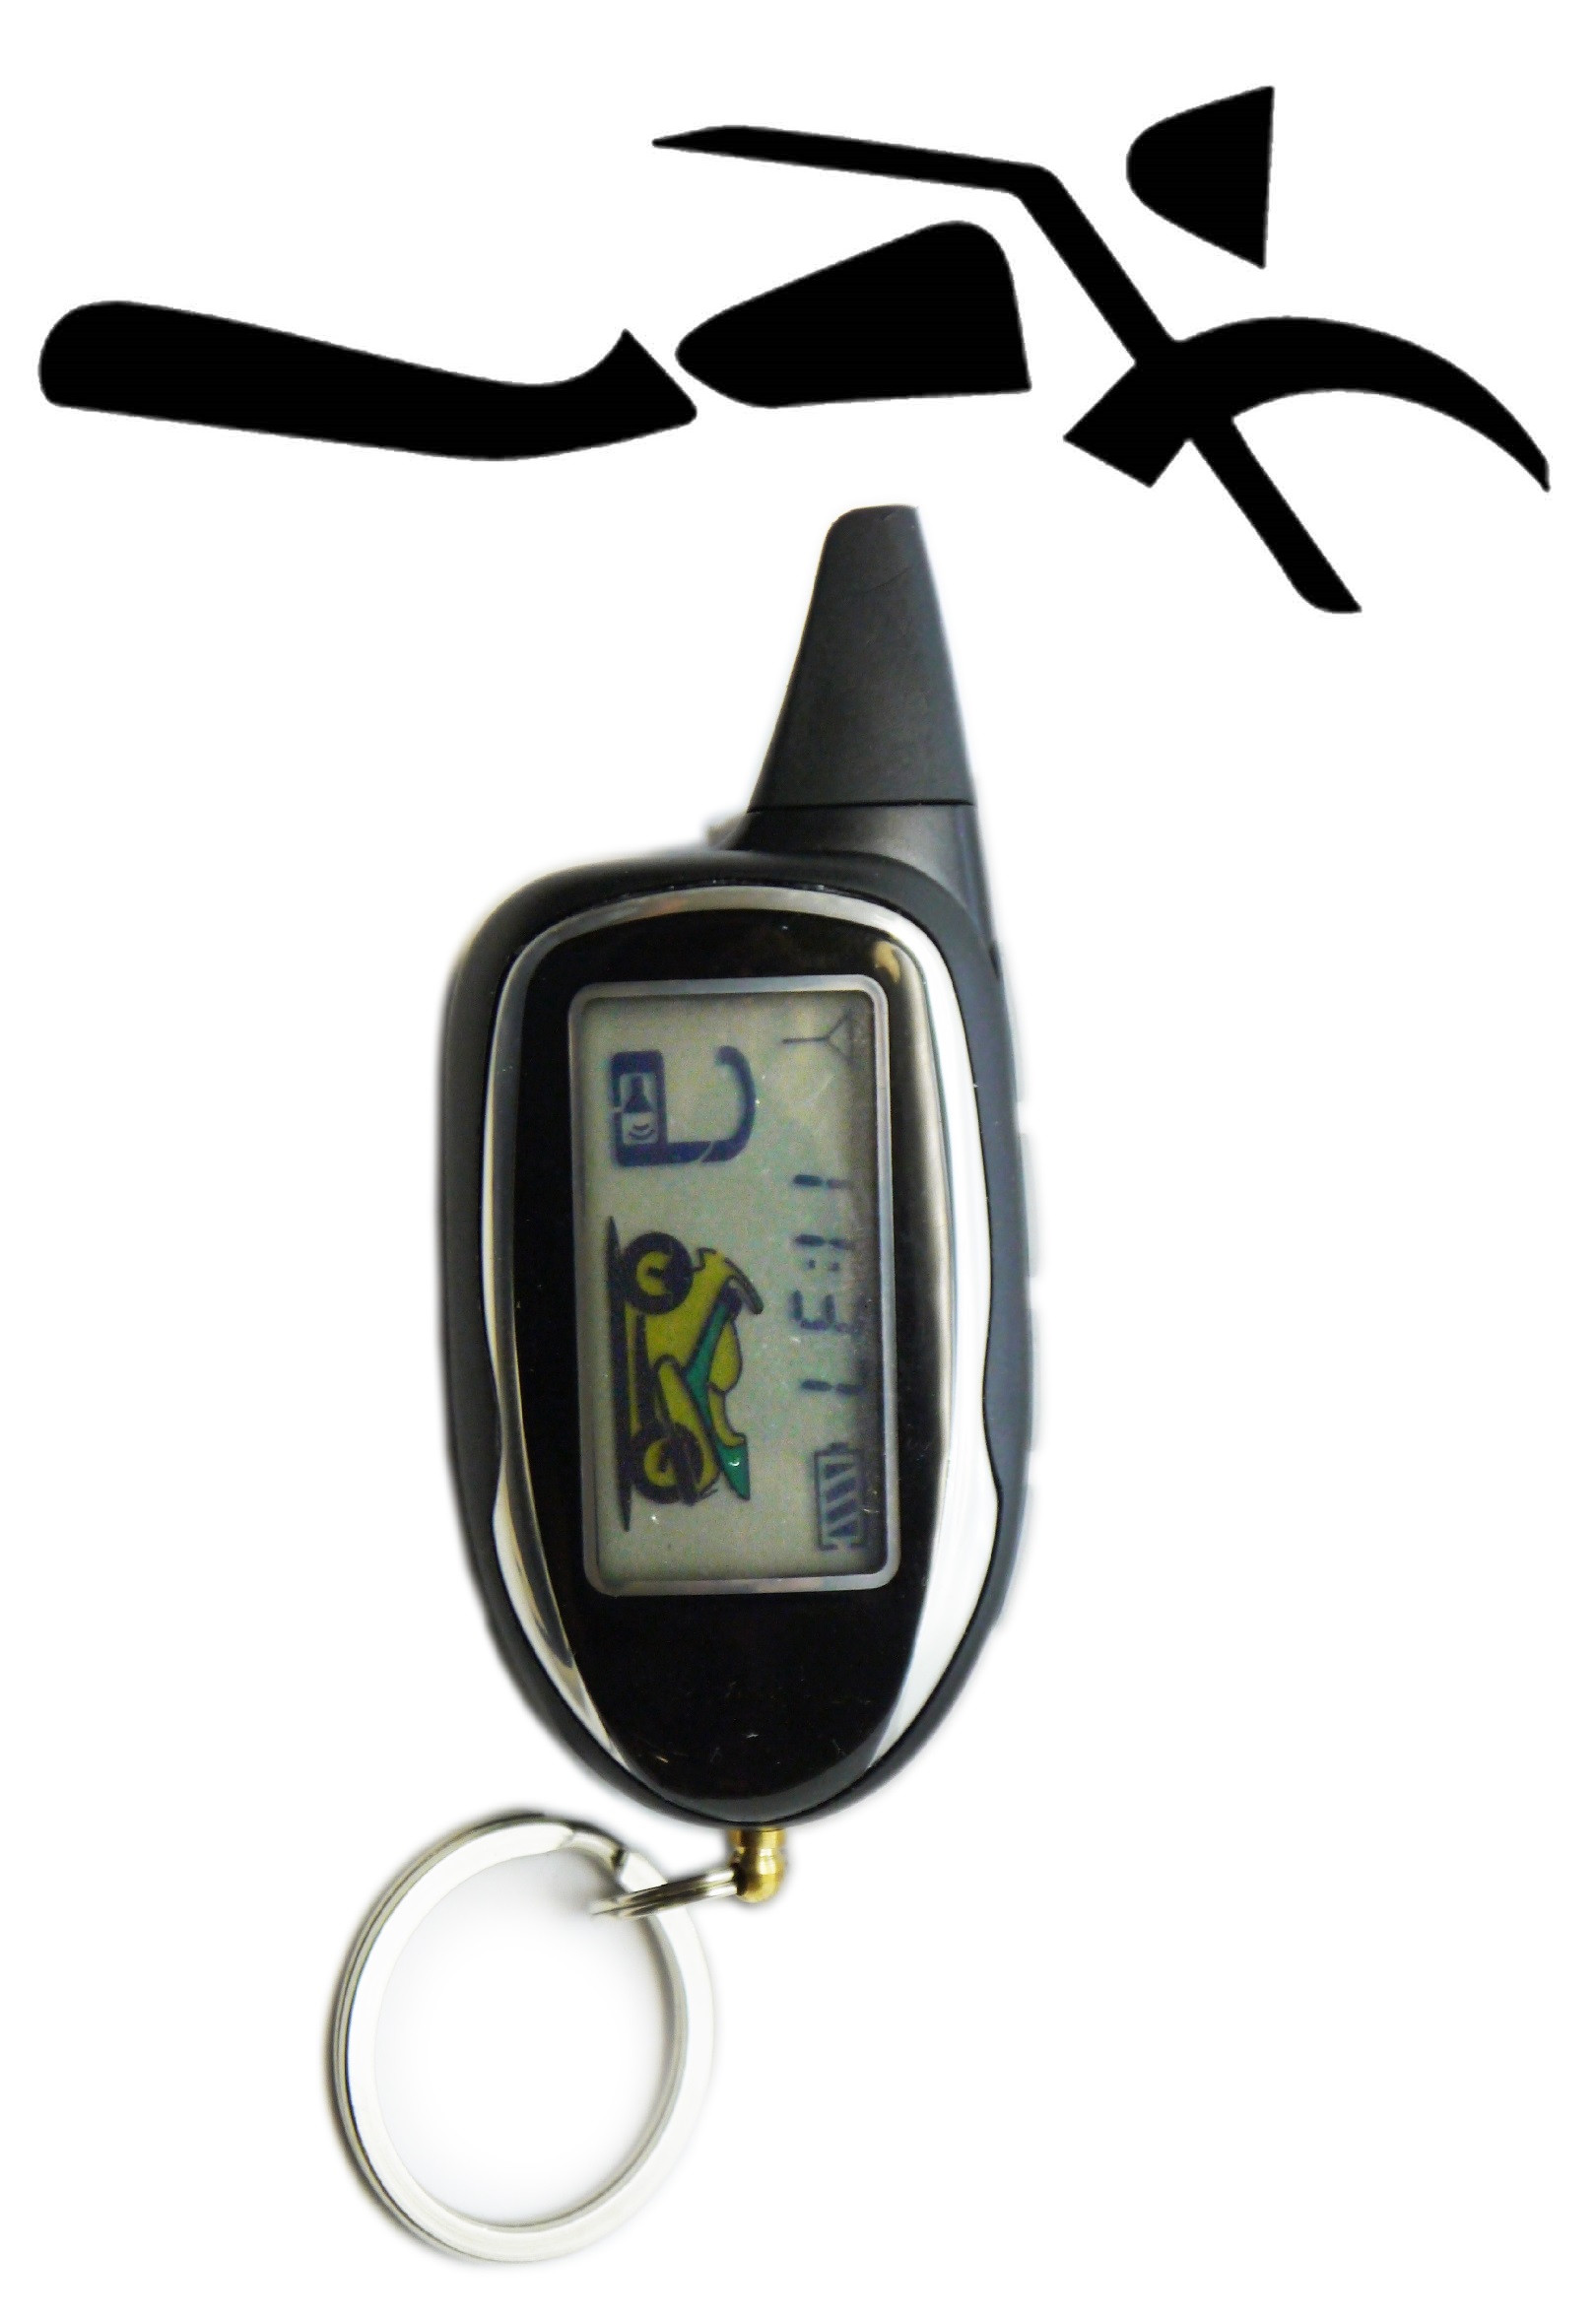 Sykik Rider SRT208 2-Way Motorcycle Alarm with LCD Pager Remote,